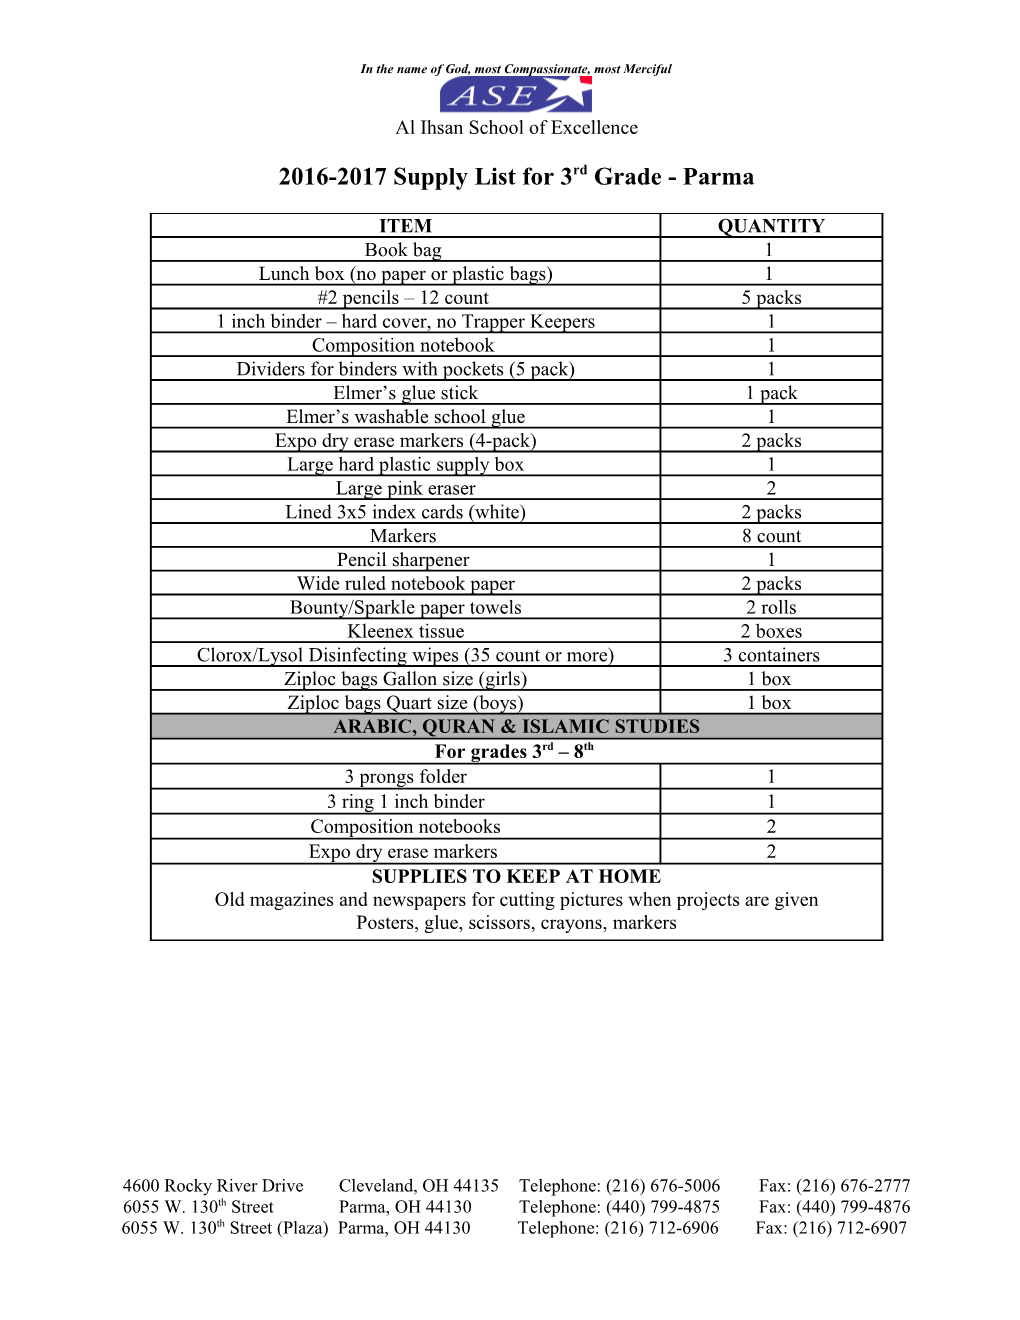 2014-2015 Supply List for 3Rd Grade - Parma